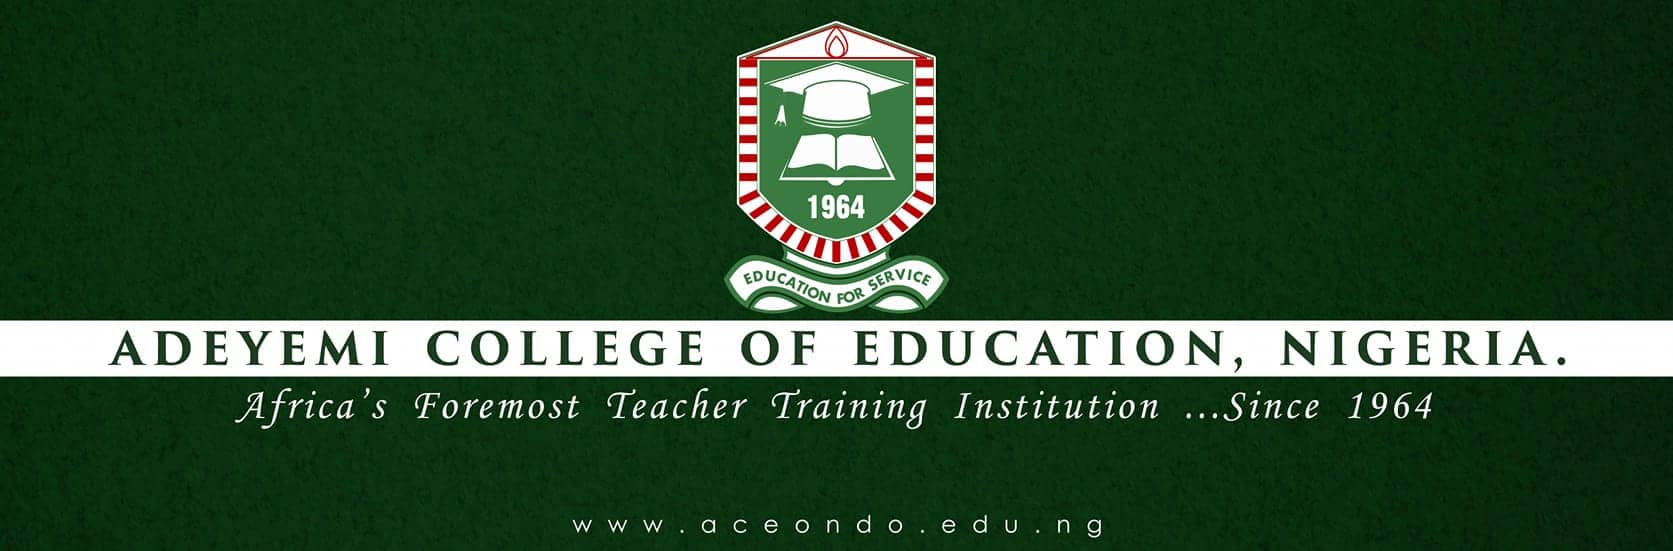 OAU Approves 6 Additional Degree Courses for ACEONDO